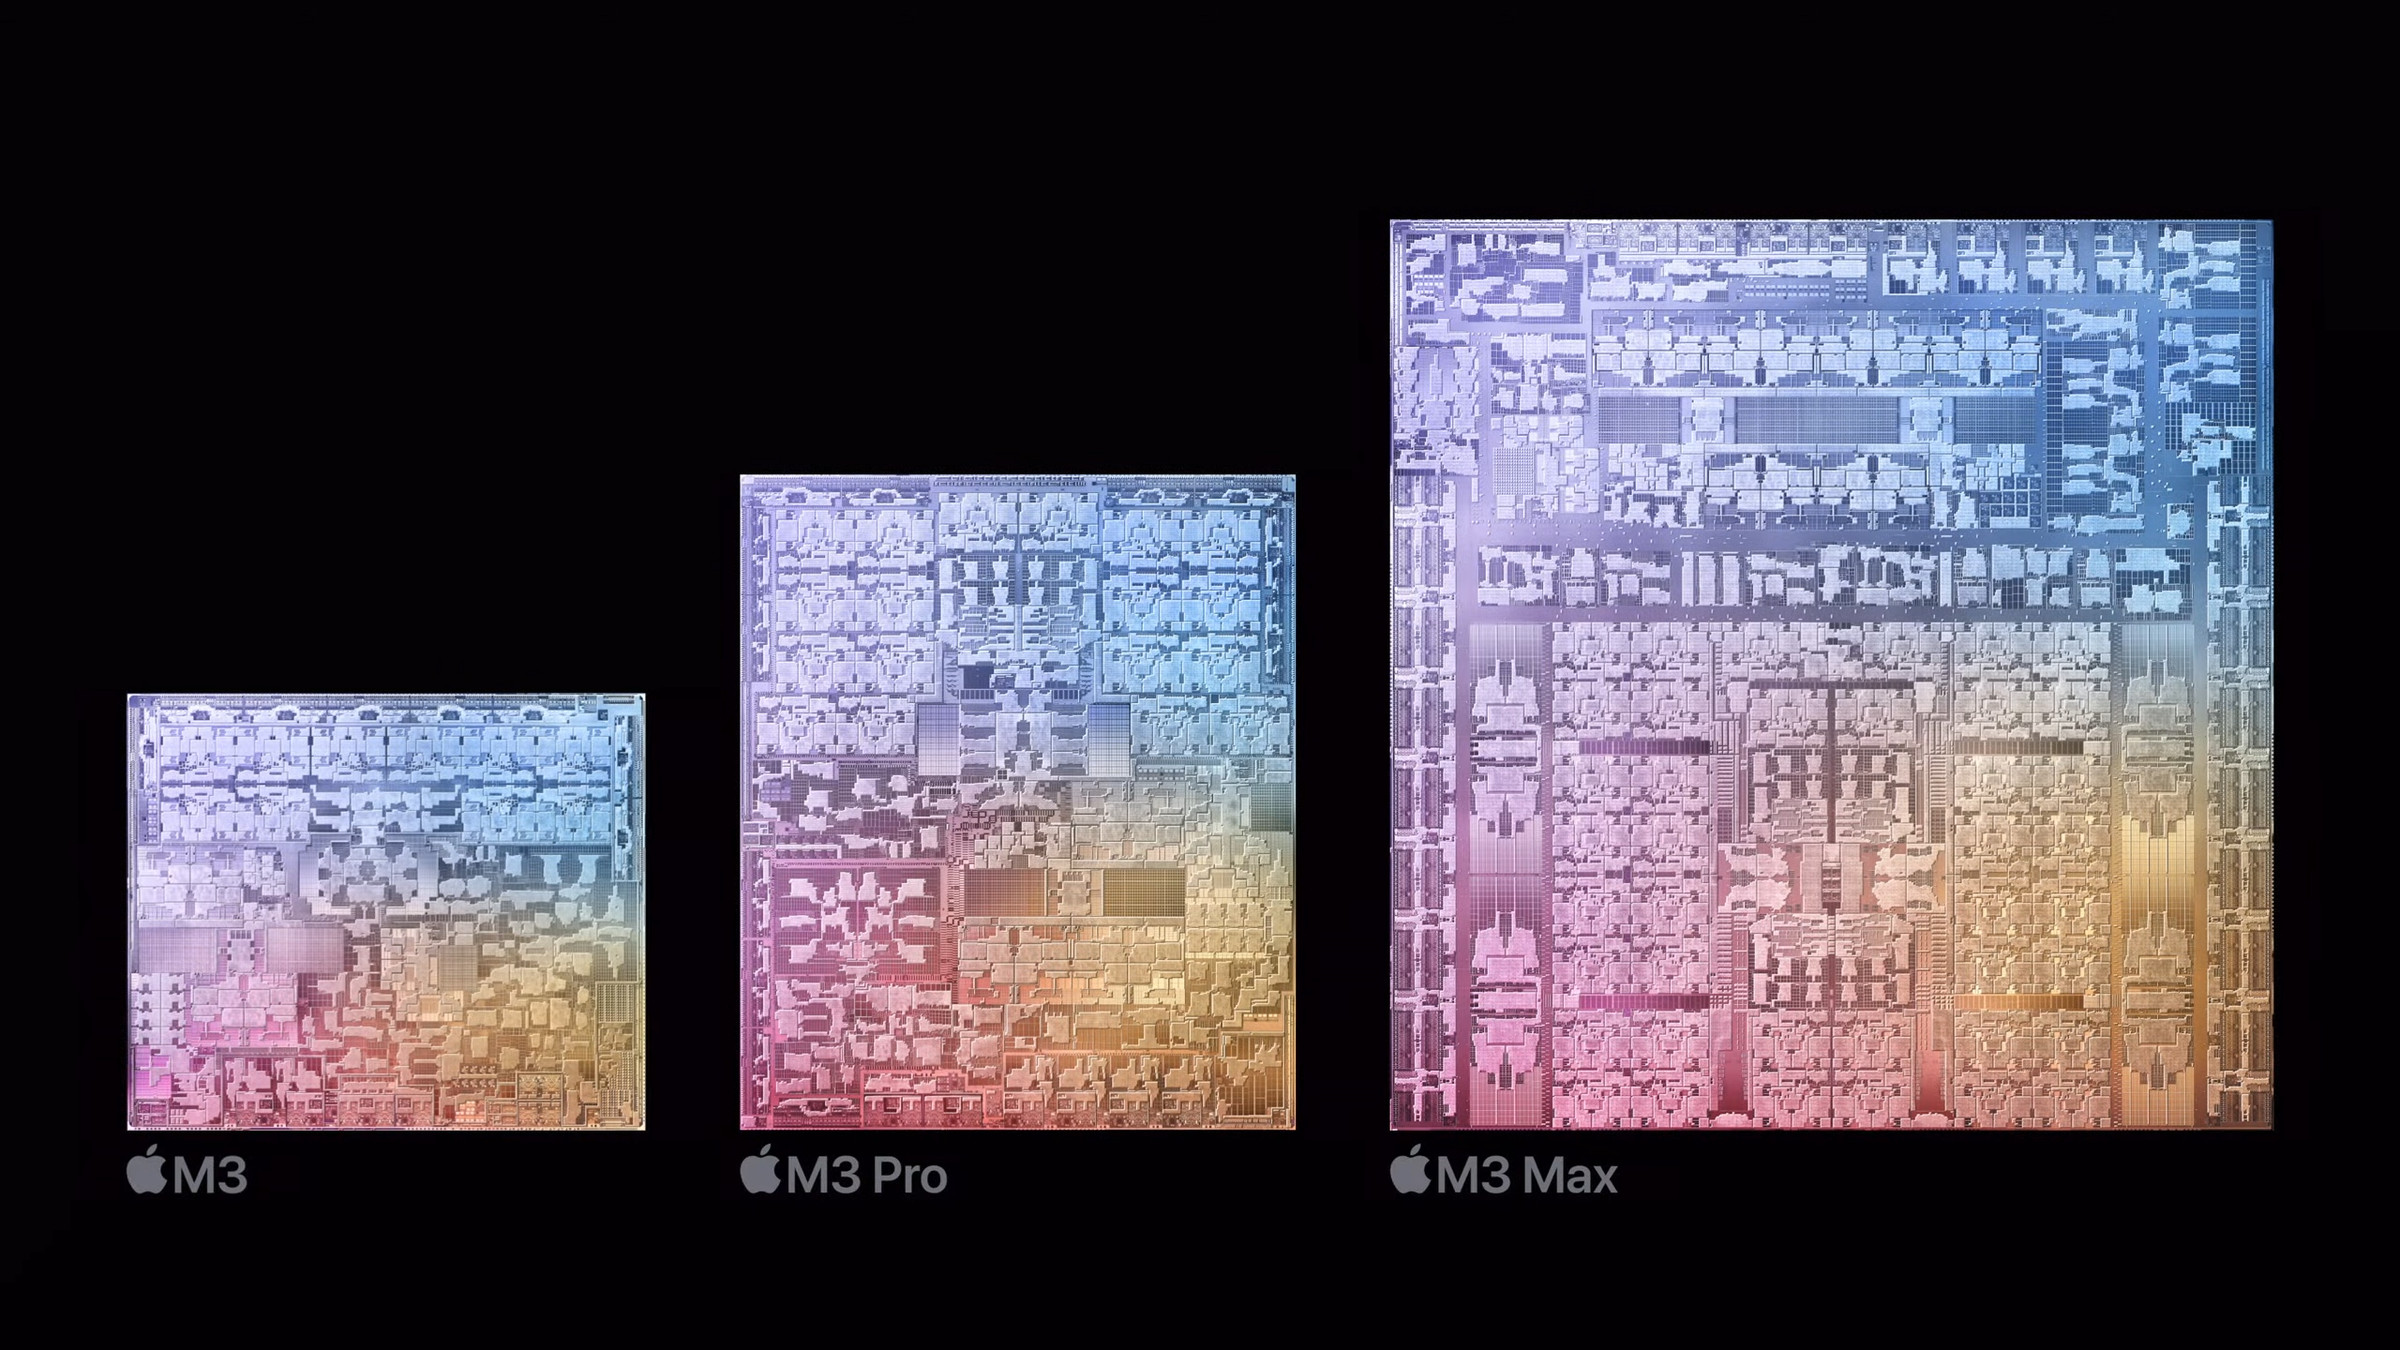 Apple’s M3, M3 Pro, and M3 Max chips.